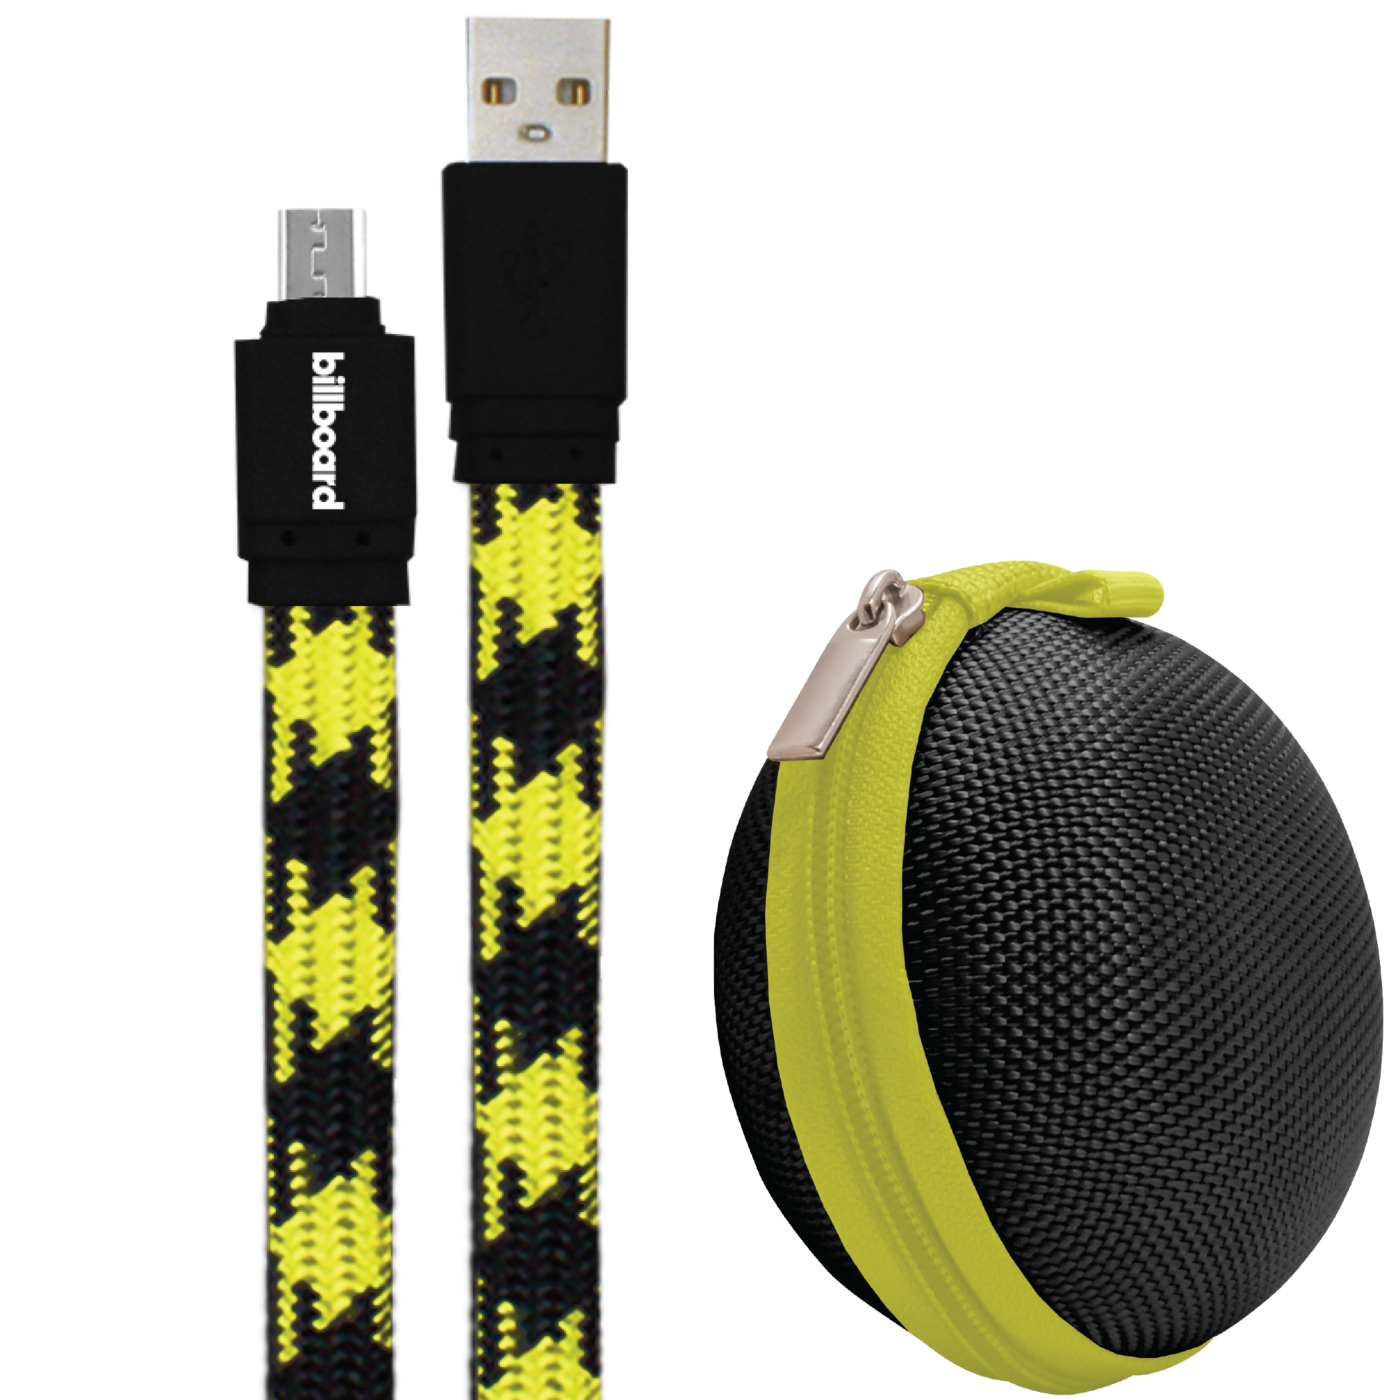 Cable Micro USB Sync & Charge 6' Yellow Color